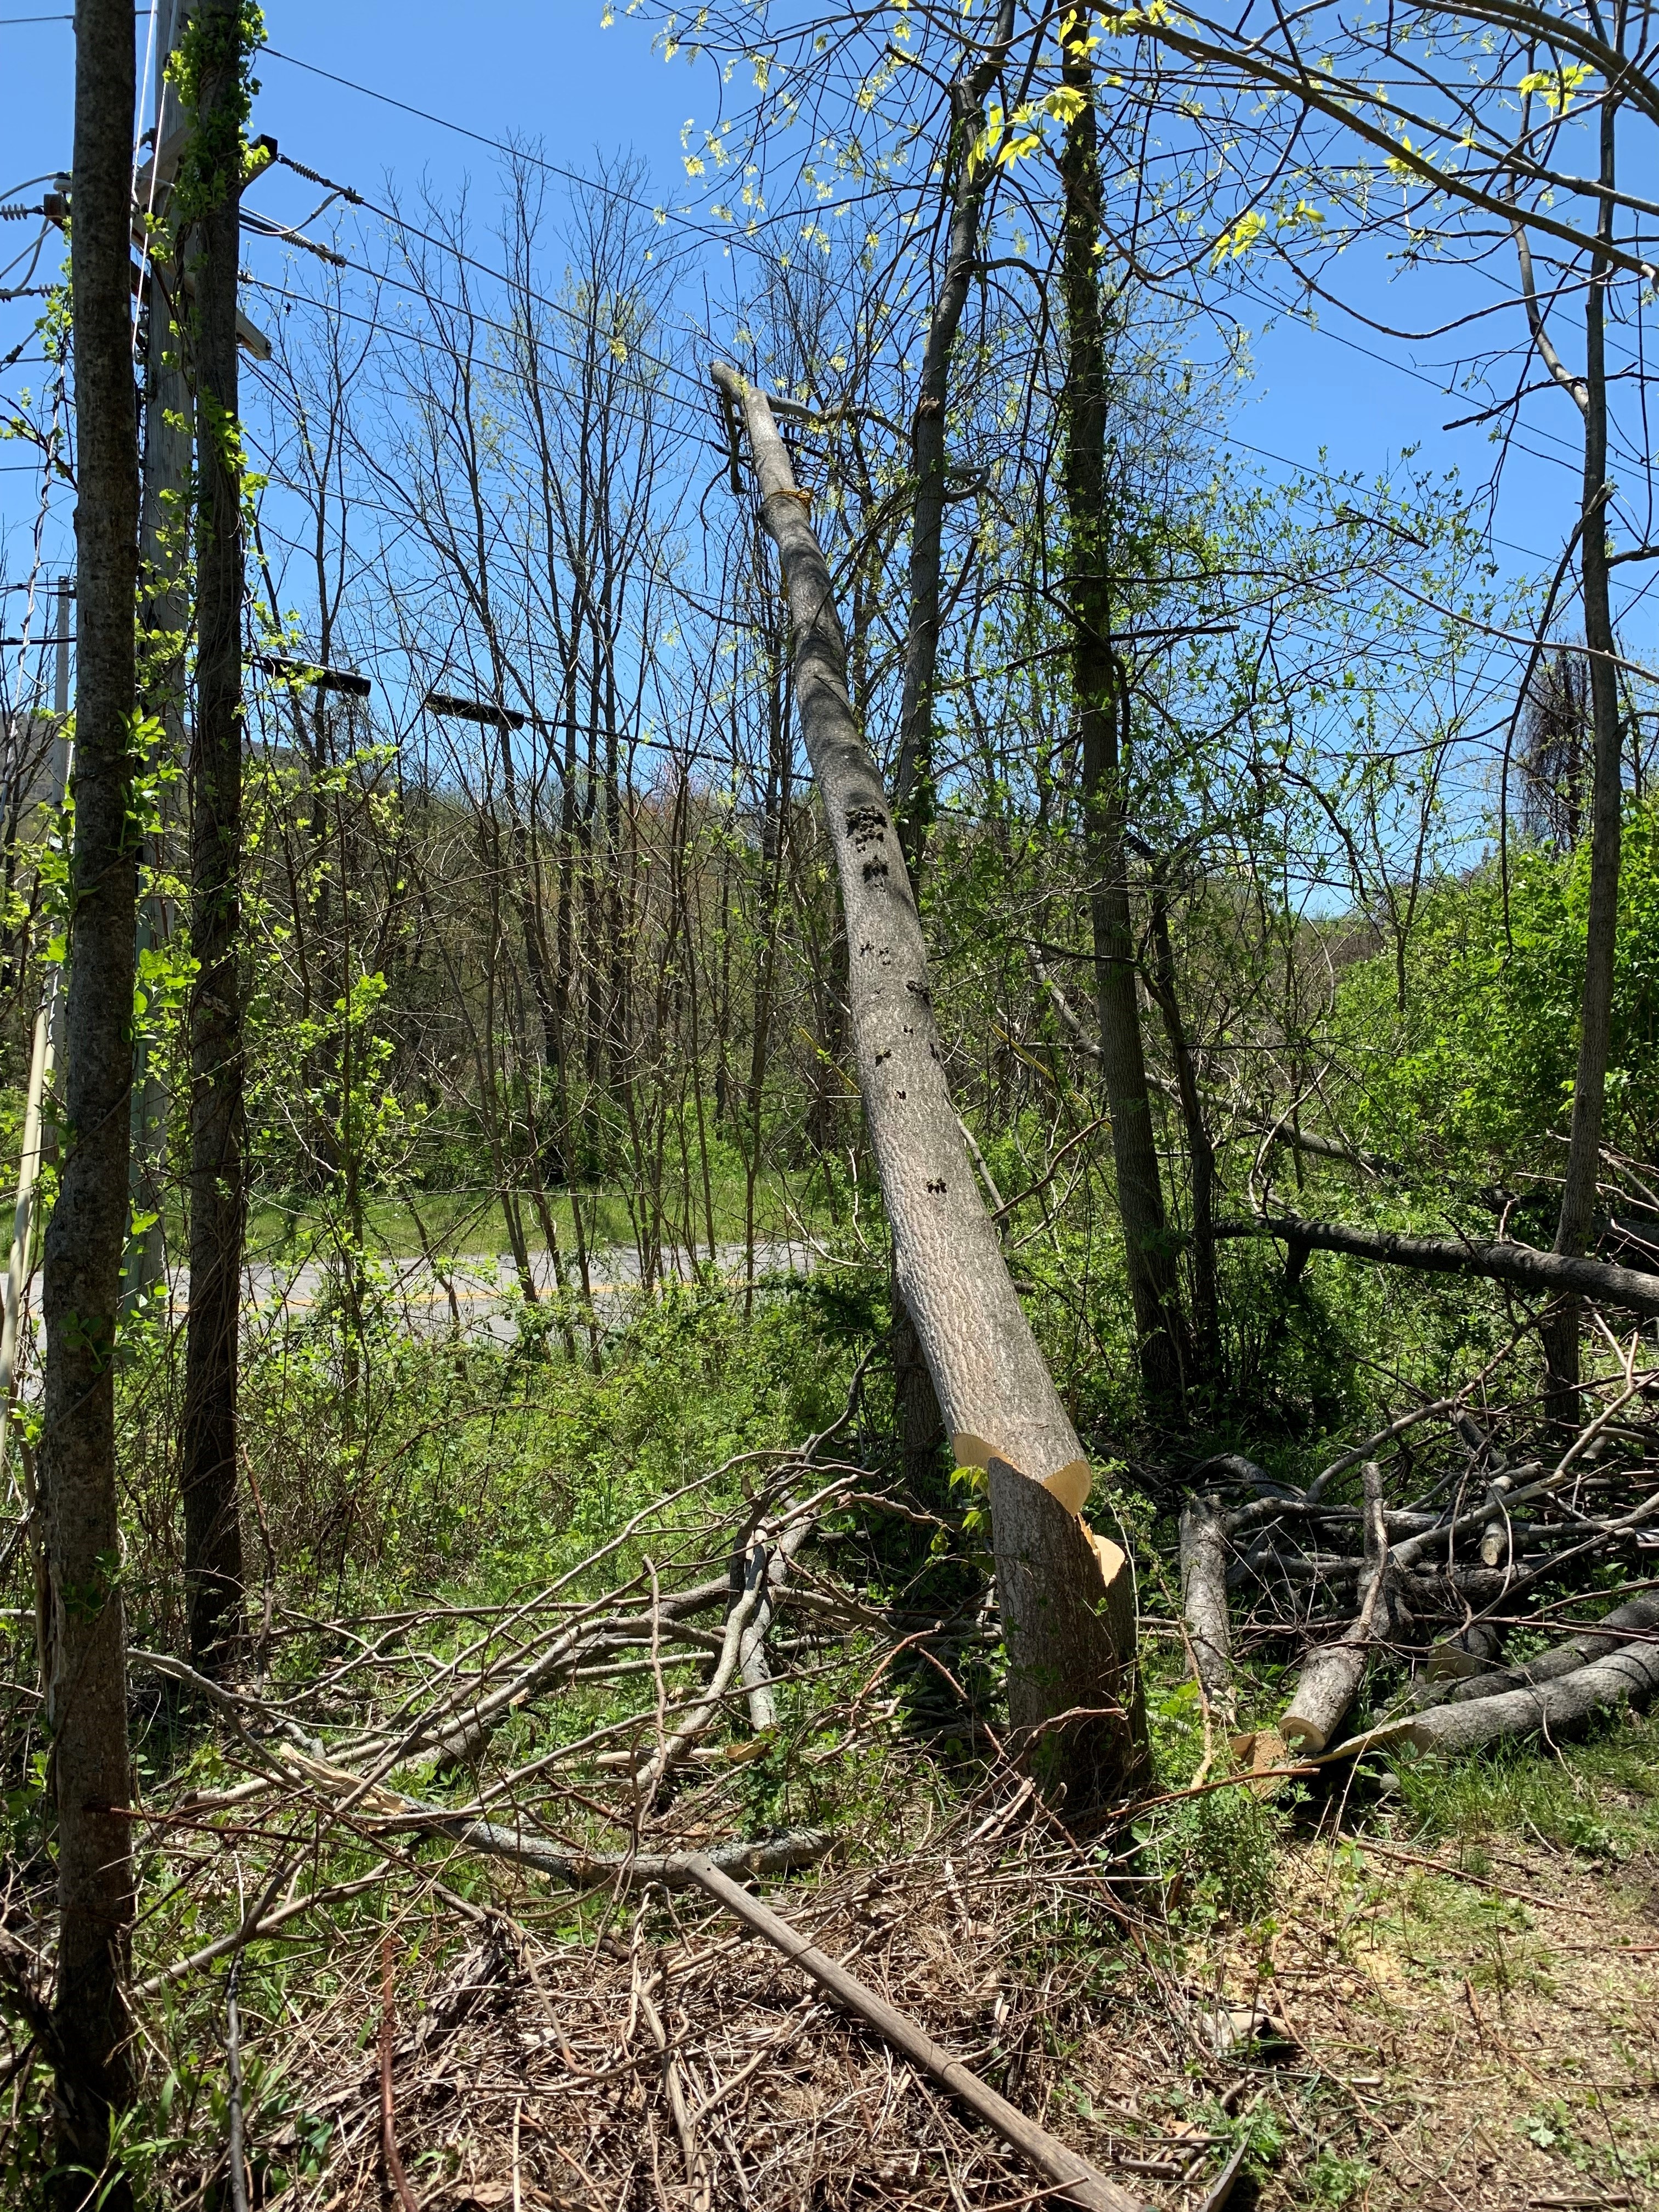 A photo of a tree that was cut down incorrectly by a homeowner, causing it to fall across the tree line and onto Sussex Rural Electric Cooperative's transmission and distribution lines. This caused an outage affecting almost 12,000 members.